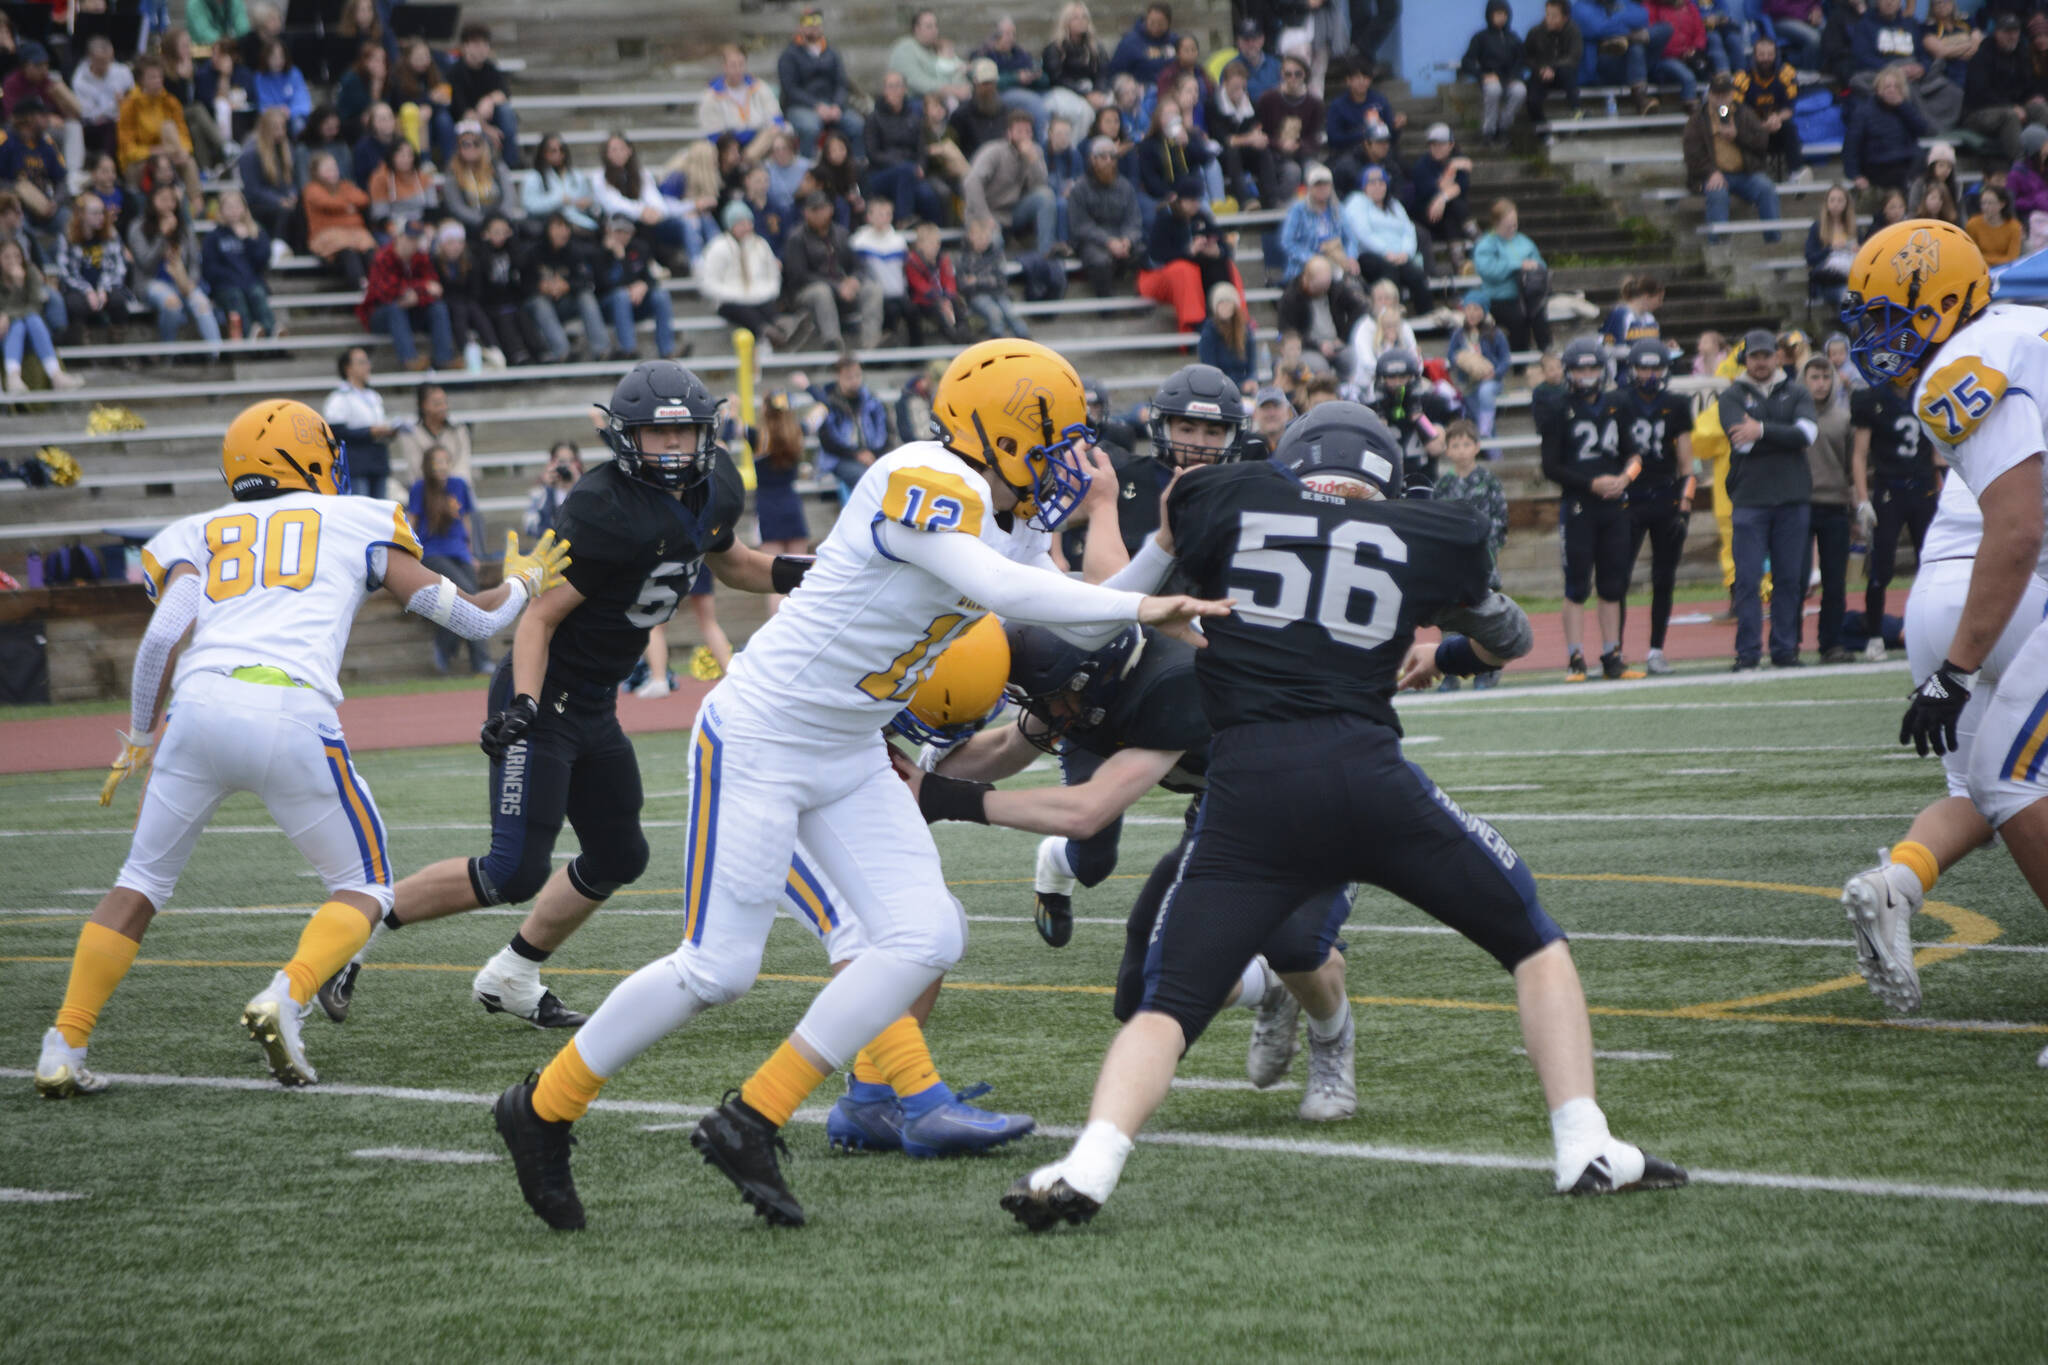 Mariner Coleman Stephens tries to block Barrow Whaler Ethan Goodwin at homecoming on Friday, Sept. 16, 2022, in Homer, Alaska. (Photo by Michael Armstrong/Homer News)